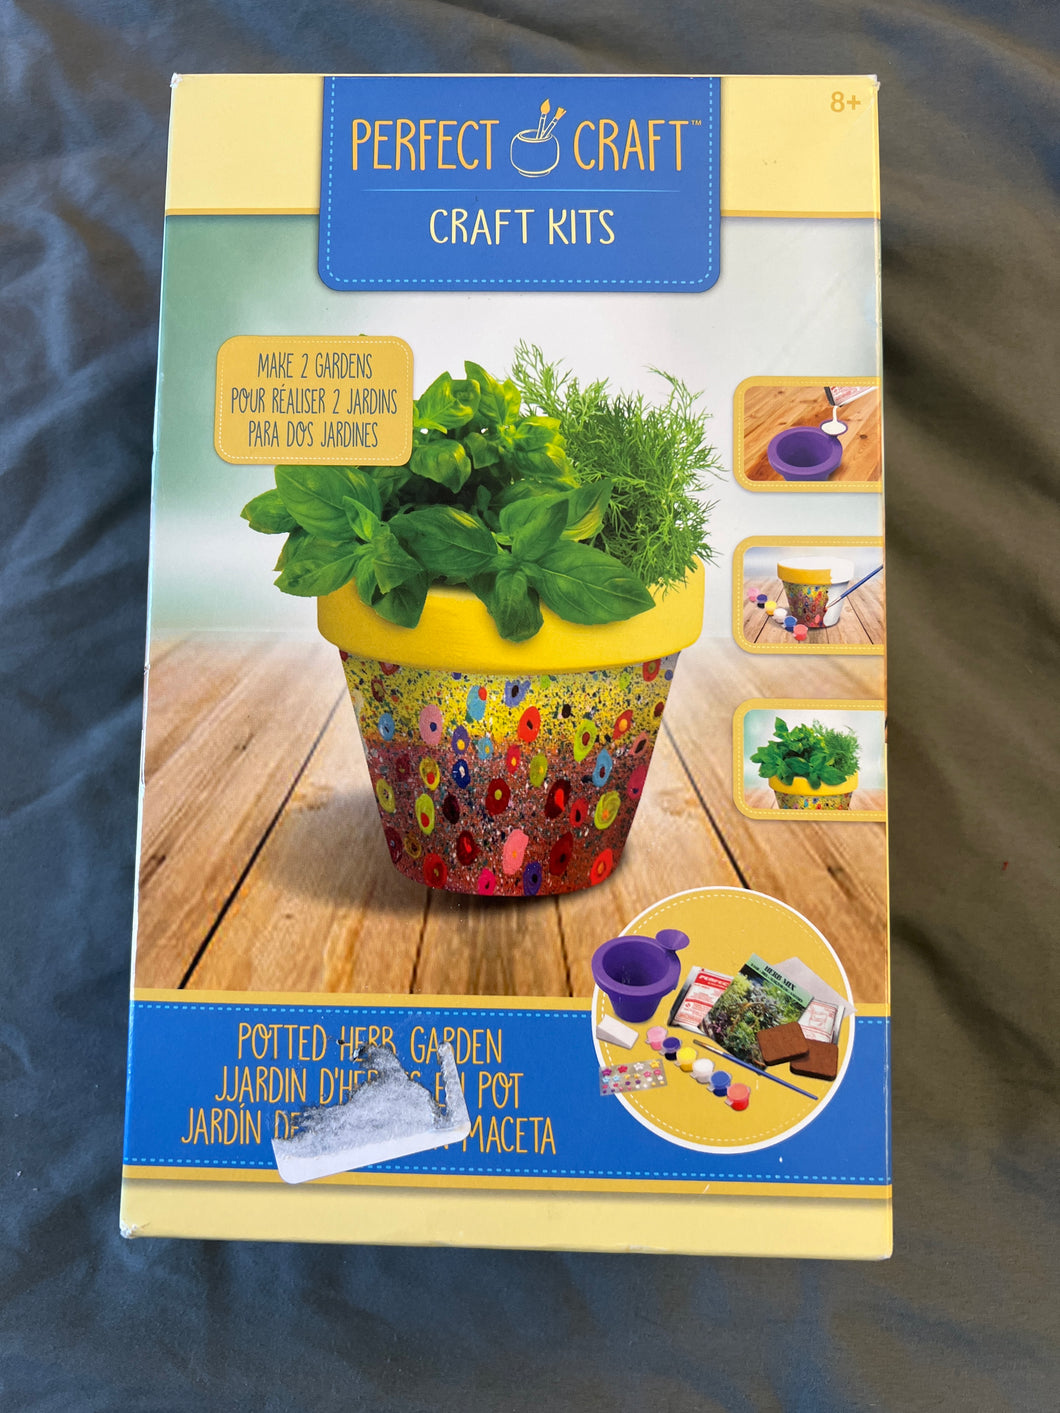 Perfect craft potted herb garden kit create your own garden